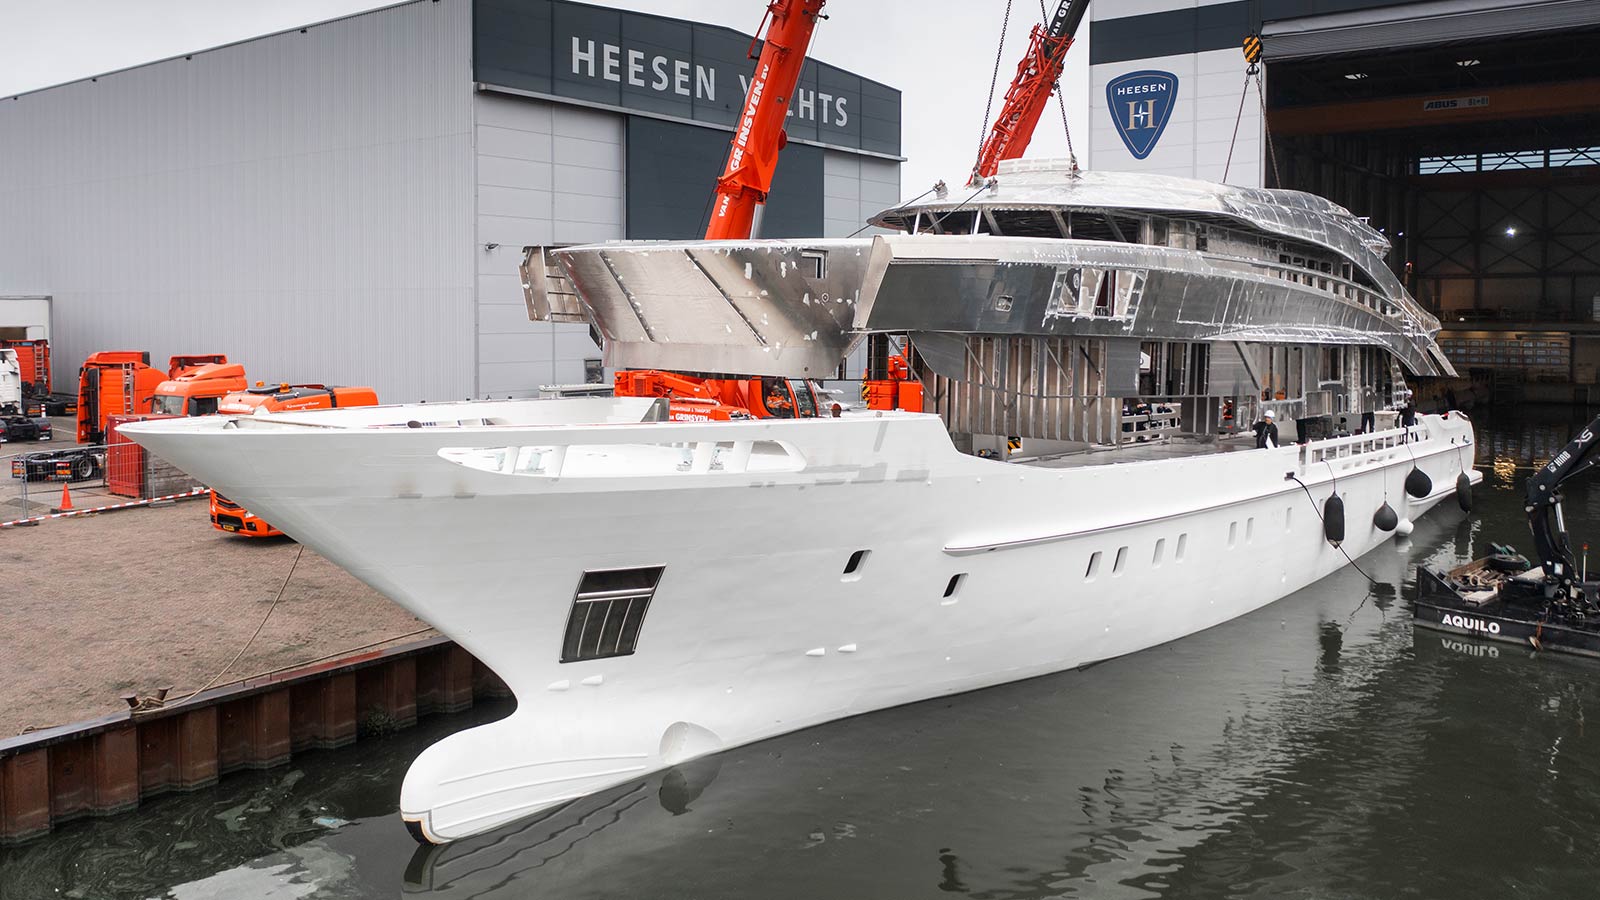 Project update: The hull and superstructure of YN 20150 Project Oslo24 are now joined together!